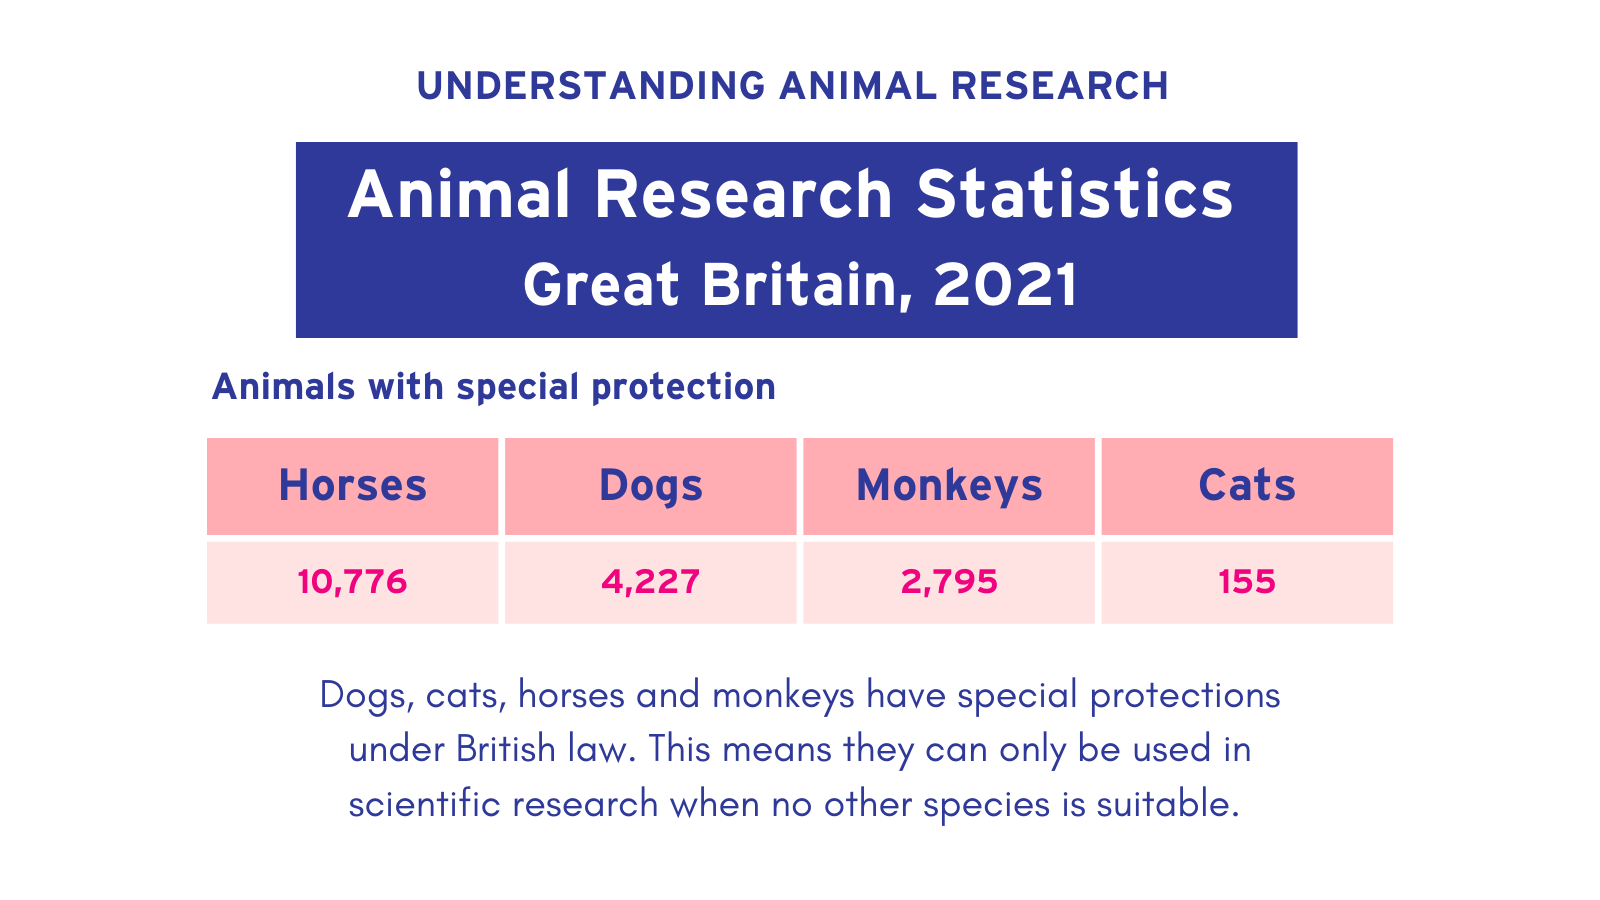 Animal research statistics for Great Britain, 2021 (specially protected species)